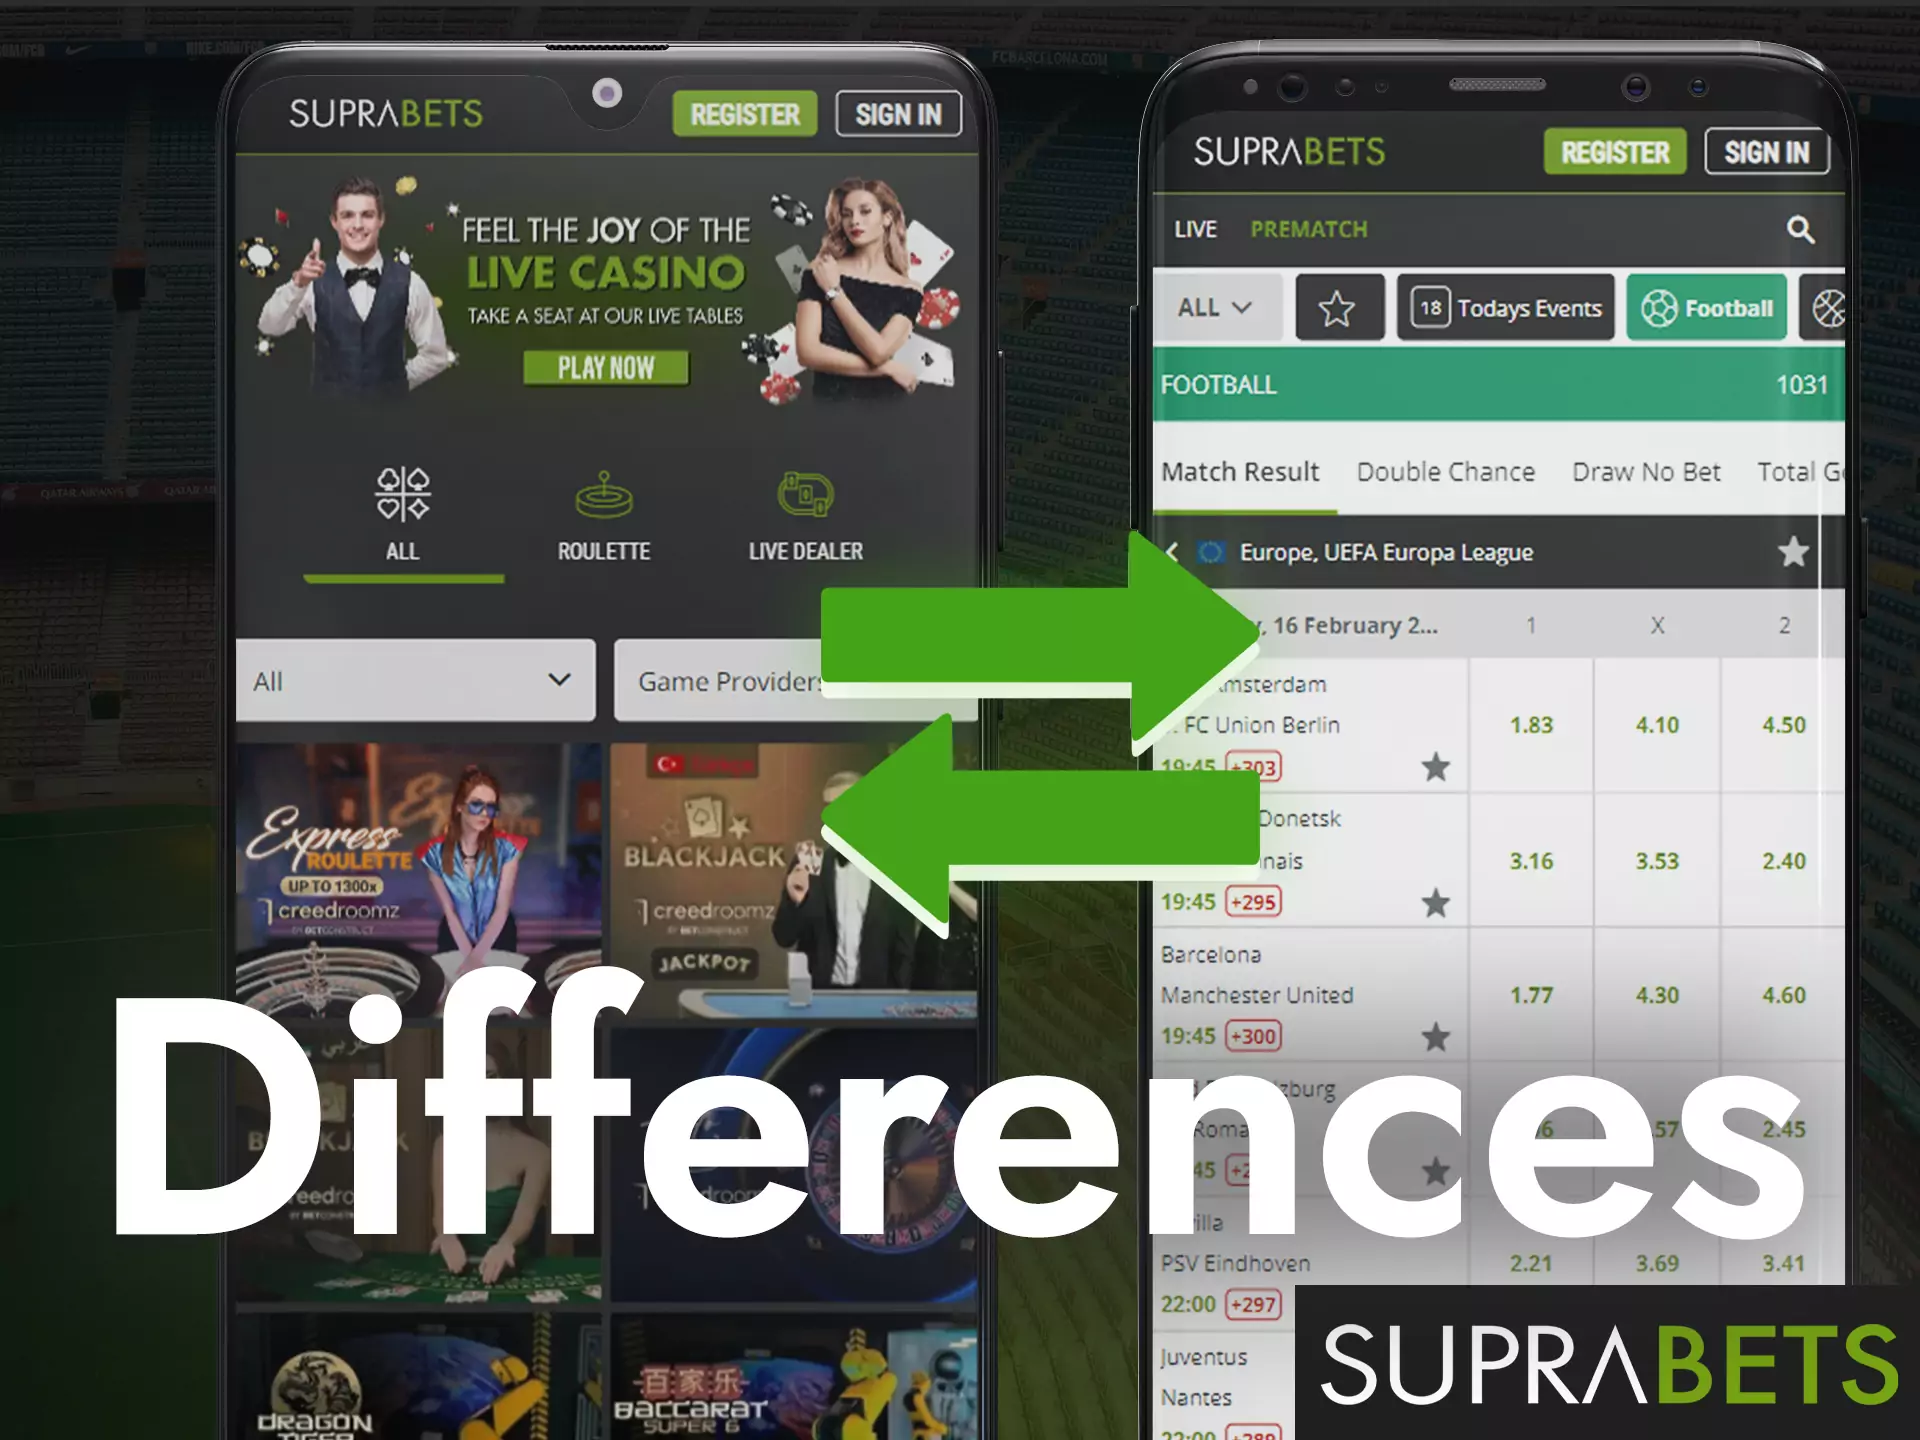 Suprabets offers intuitive and simple controls for all platforms.